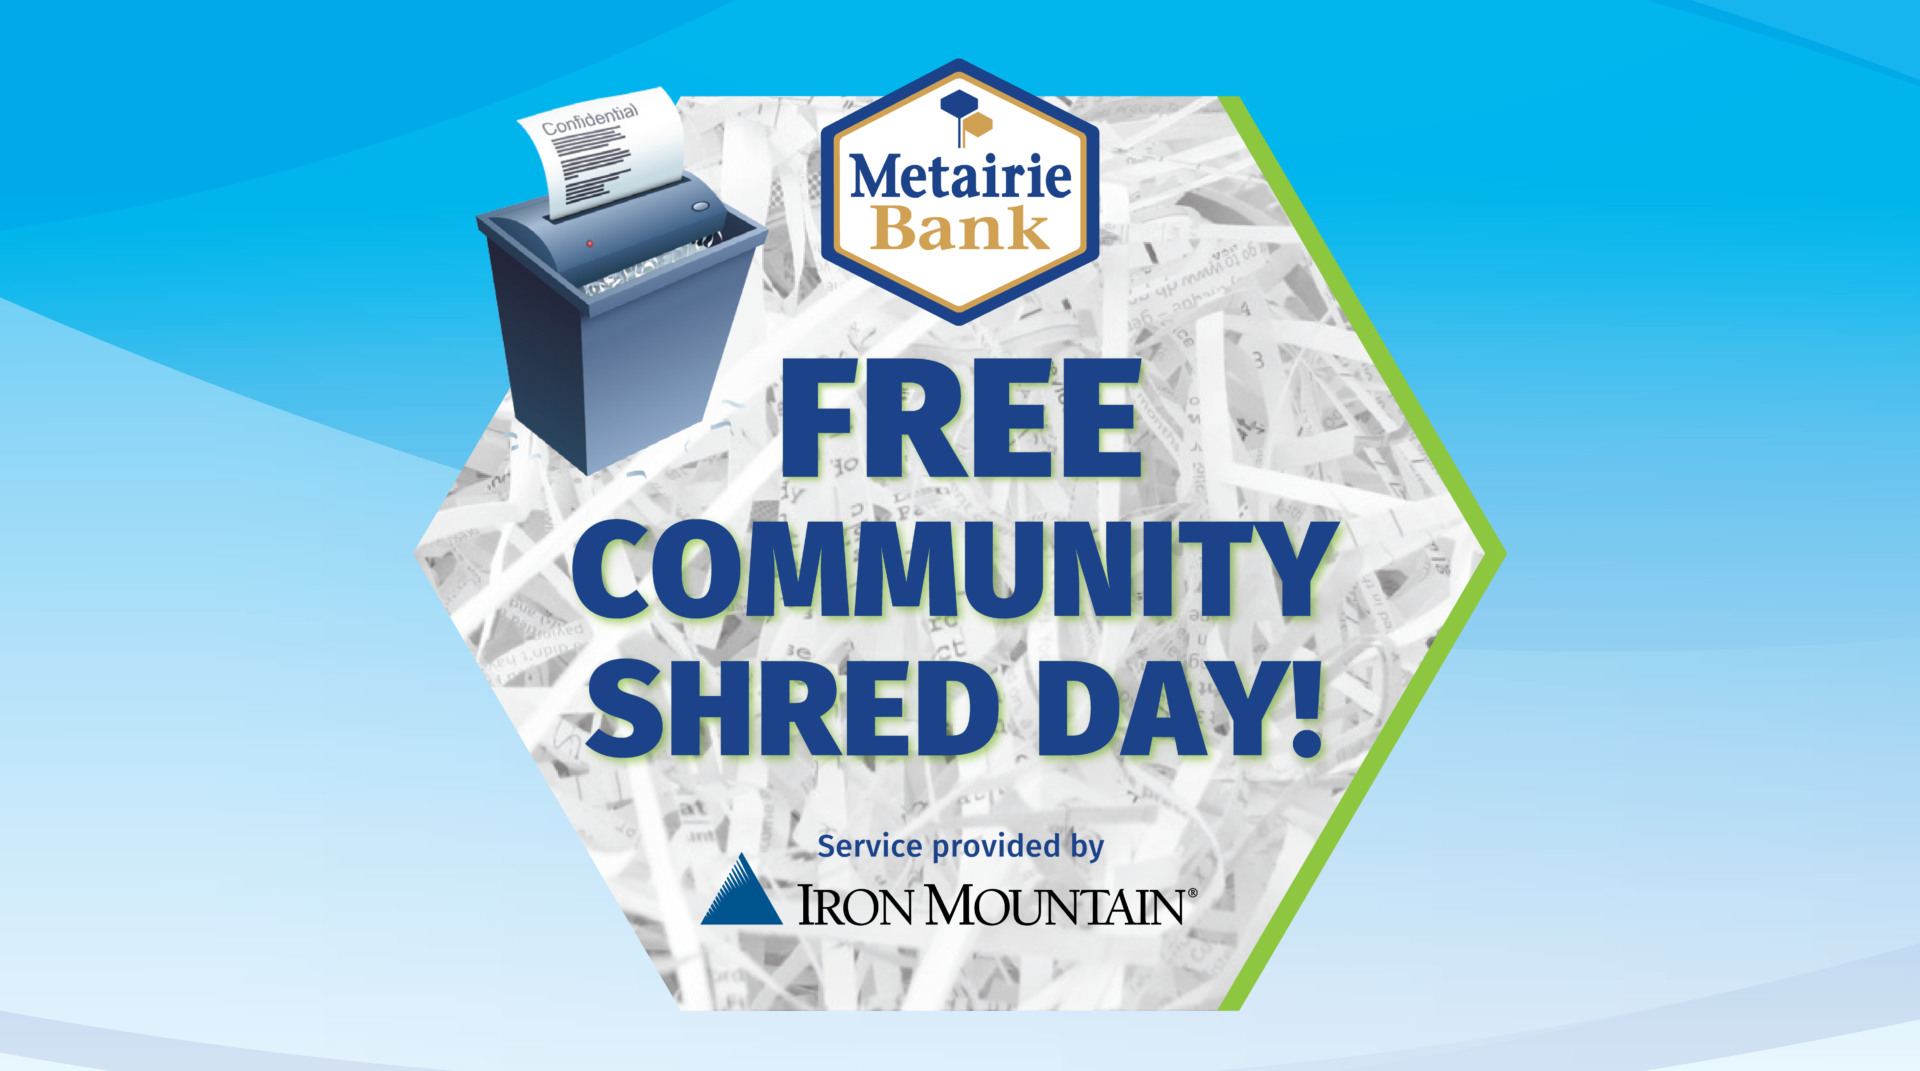 Free Community Shred Day in April! Metairie Bank